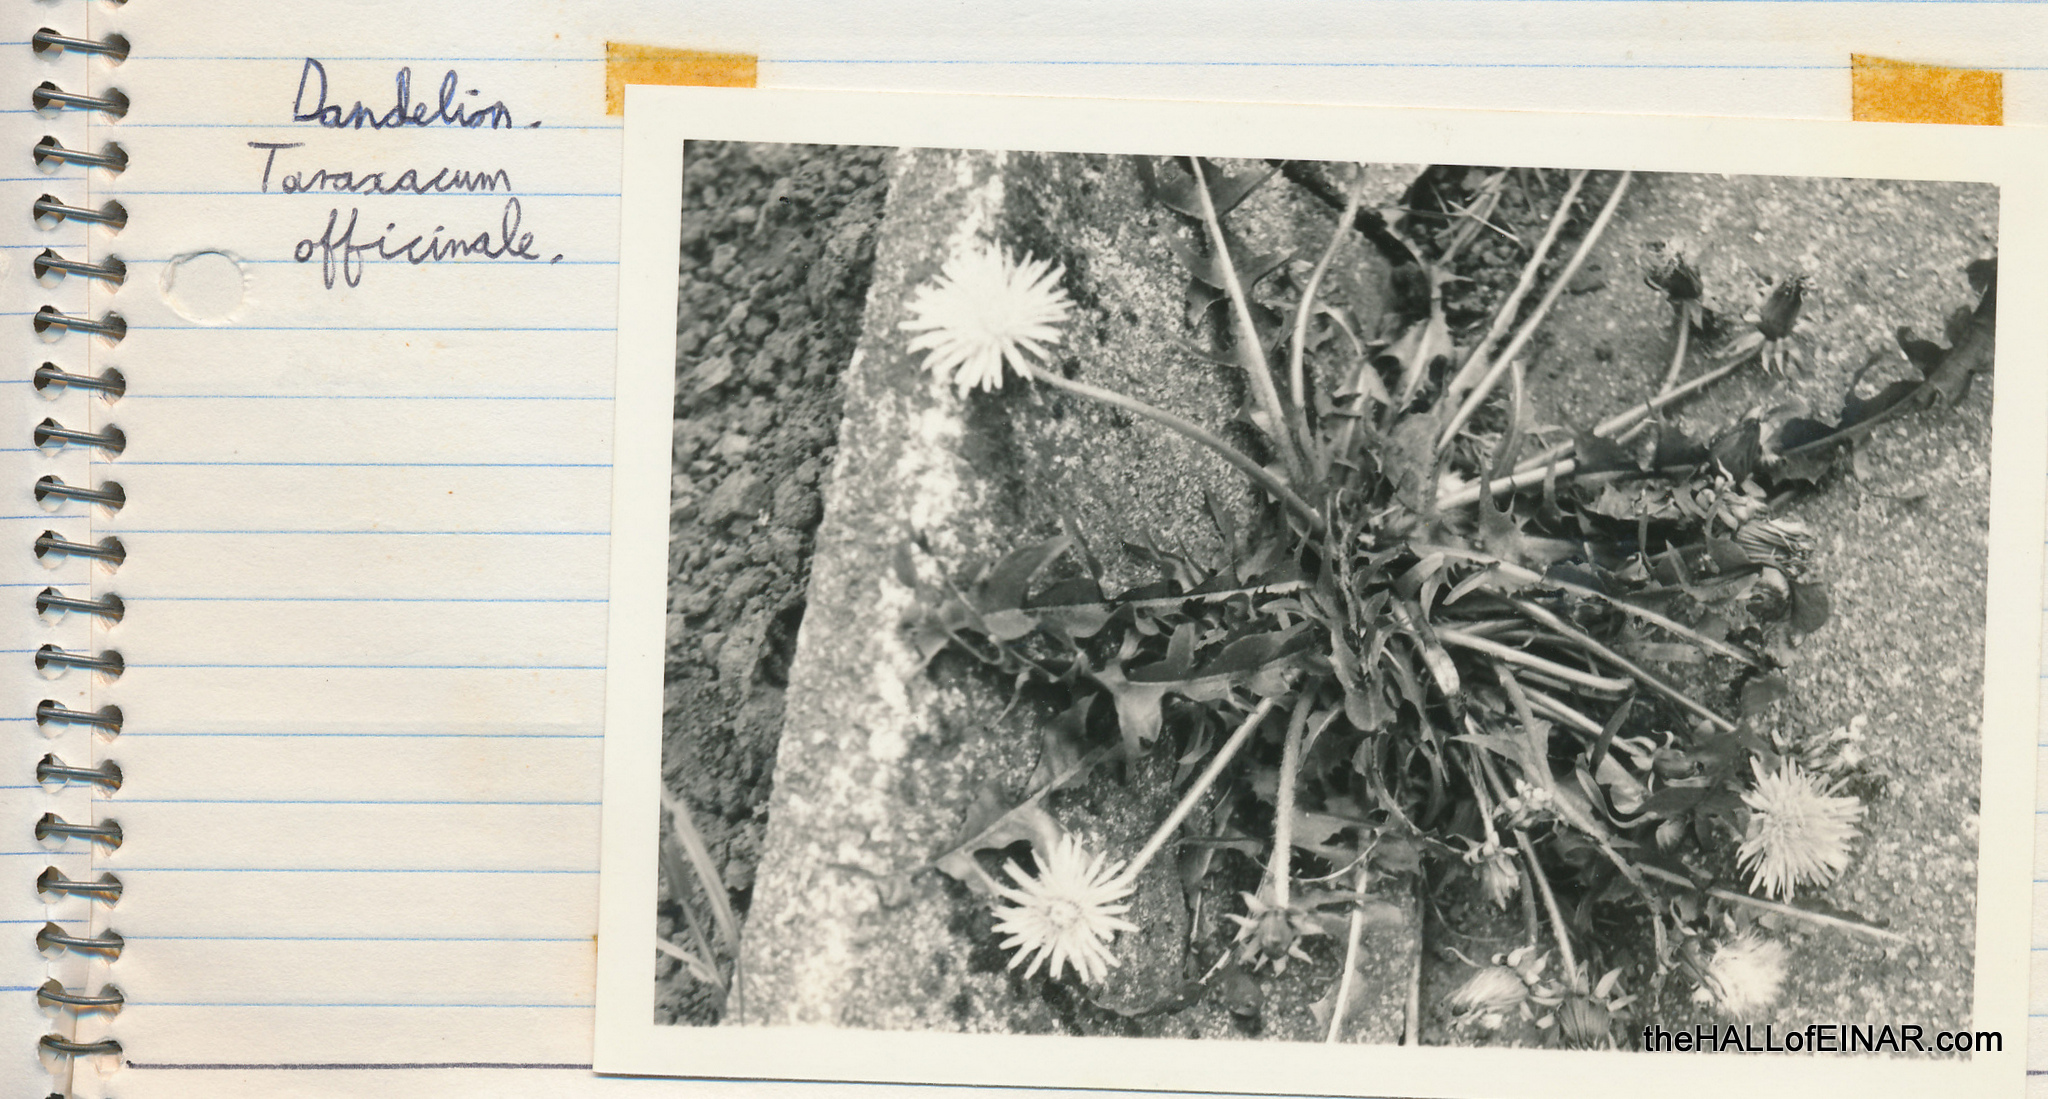 Dandelion - 1970s Nature Notebooks - The Hall of Einar